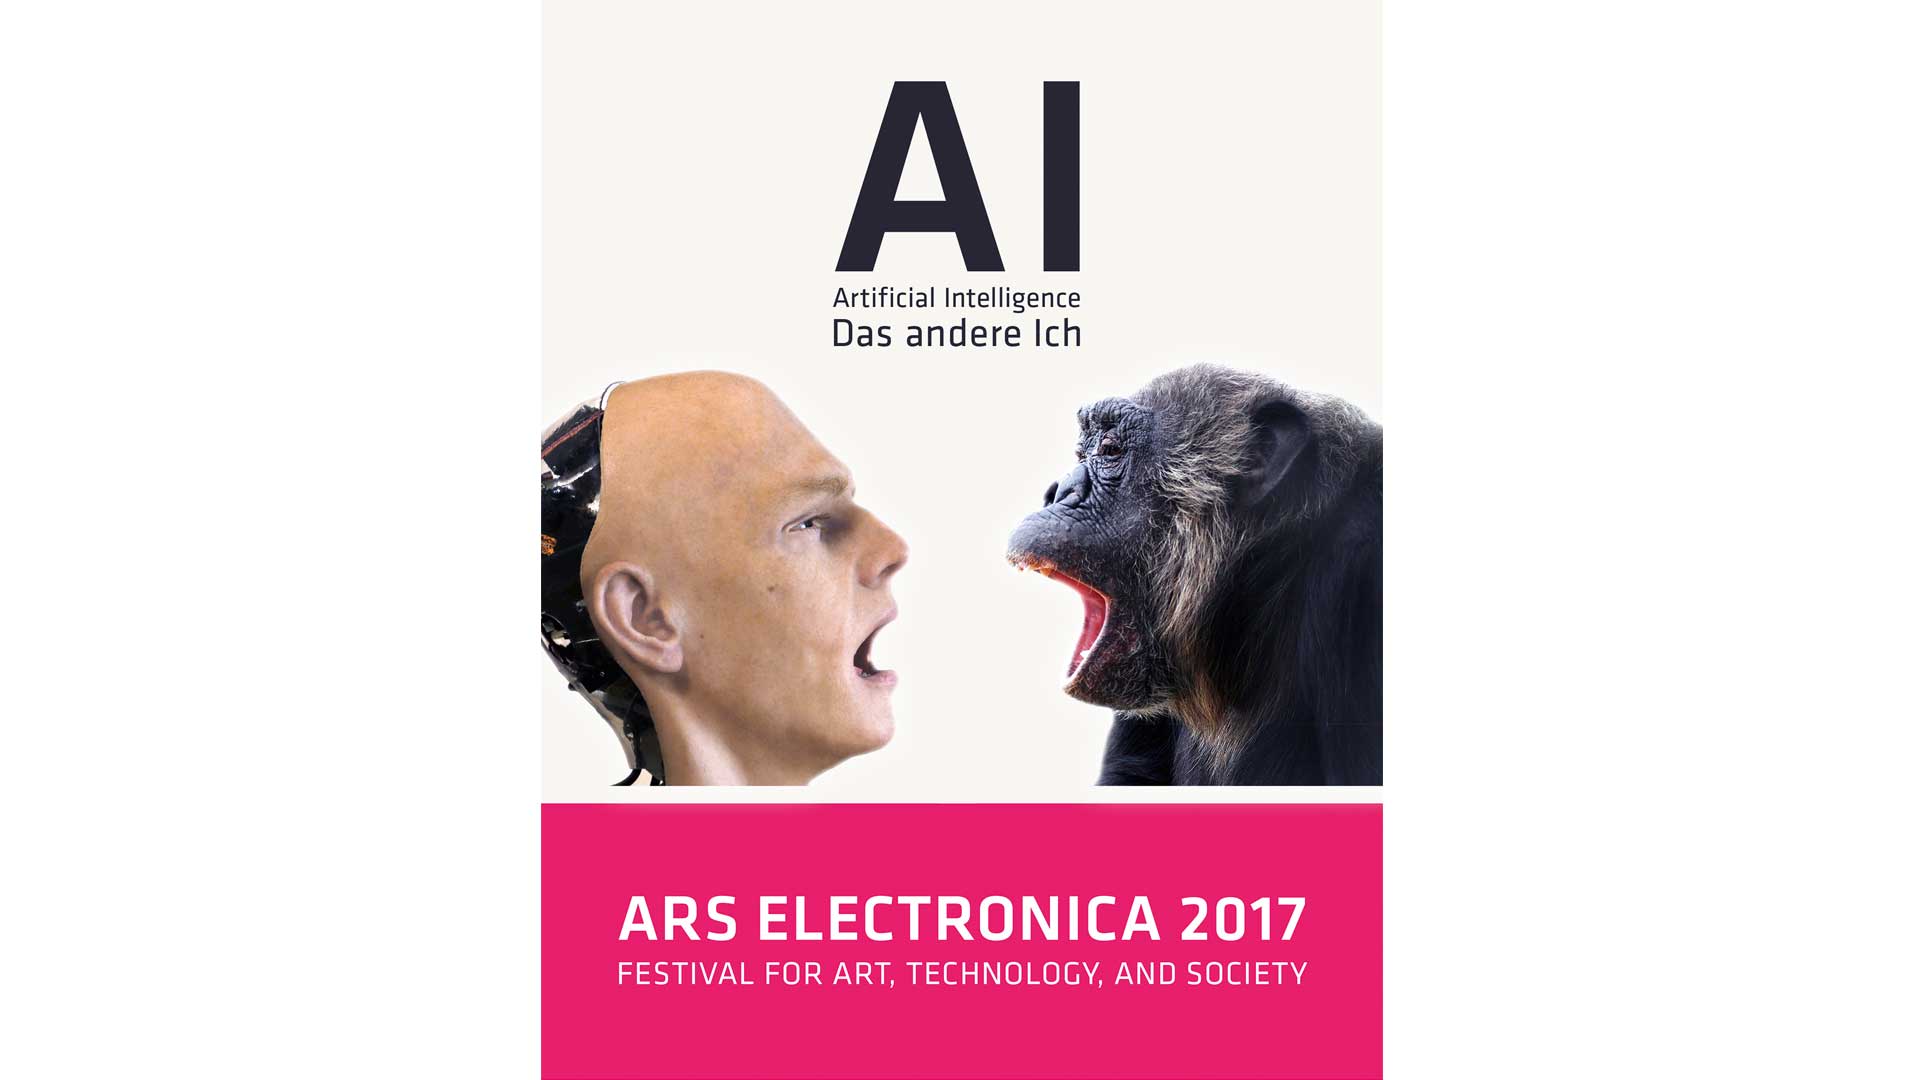 ars electronica 2017